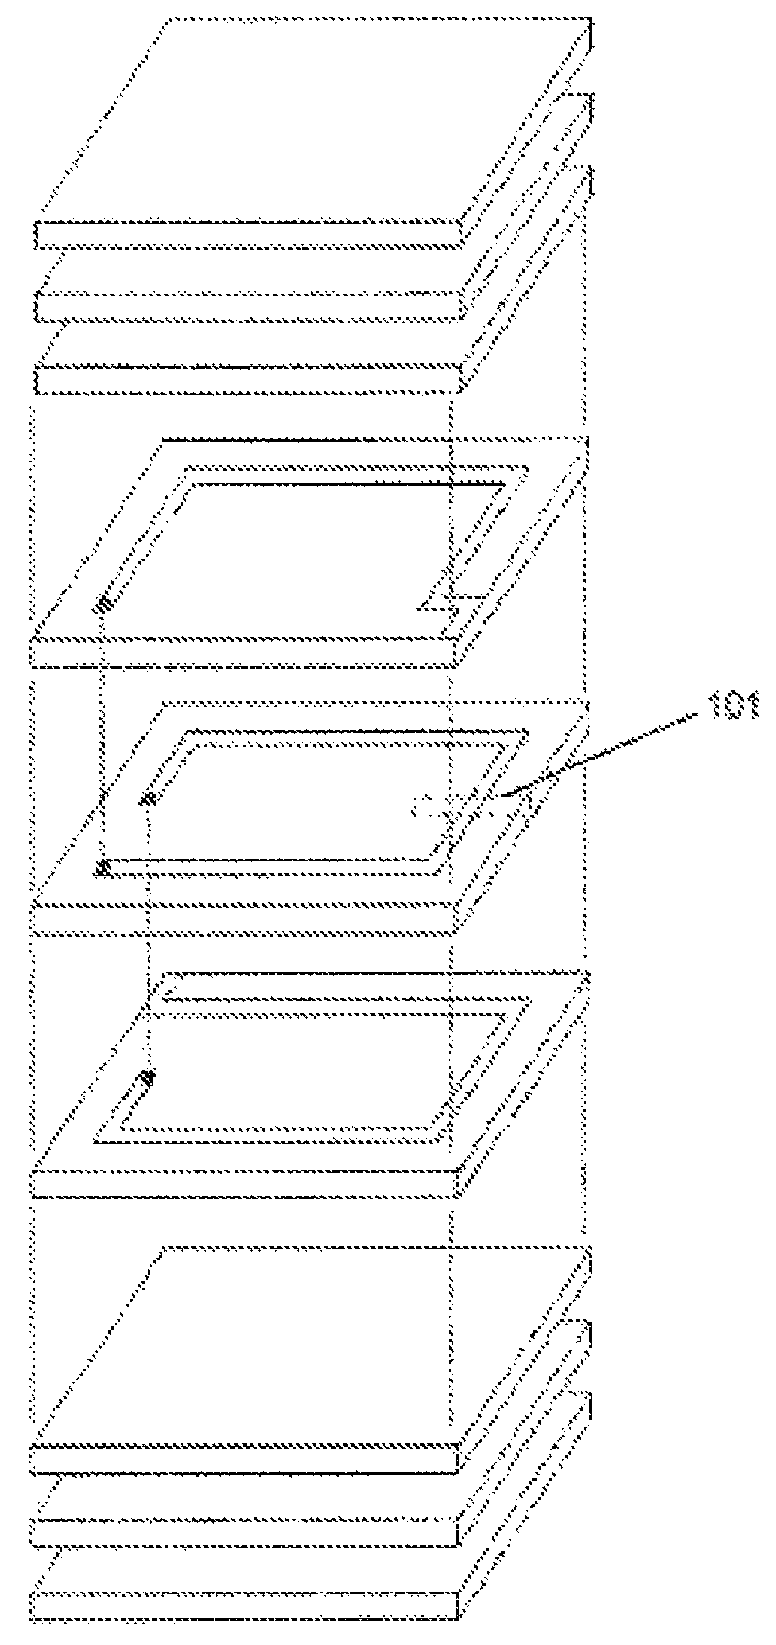 Method for manufacturing laminated coil devices